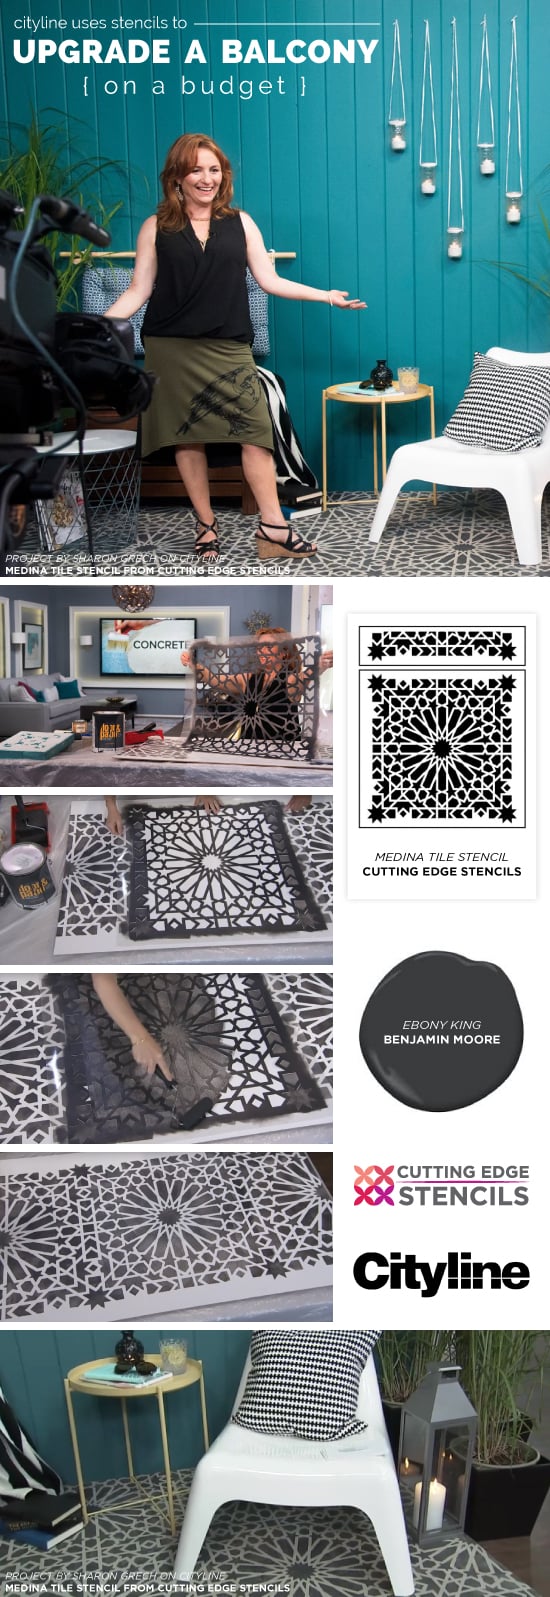 Sharon Grech from Cityline shares how to use the Medina Moroccan Tile Stencil from Cutting Edge Stencils in a budget friendly concrete balcony makeover. http://www.cuttingedgestencils.com/medina-moroccan-design-tile-stencil-wall-stencils.html